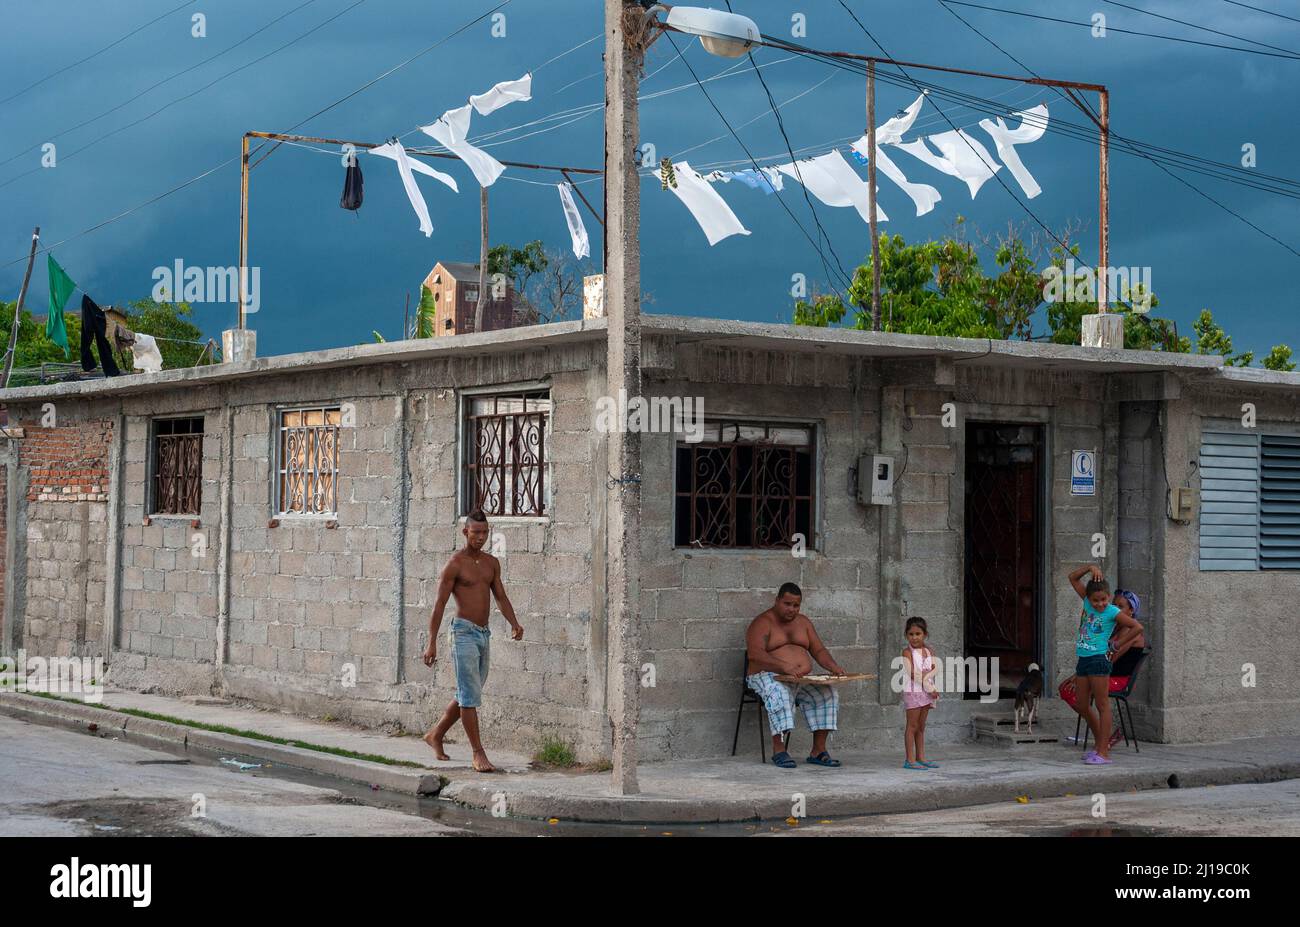 Before the storm hits, a family and their dog enjoy each other's company on the front step of their home in Manzanillo, Cuba. Stock Photo